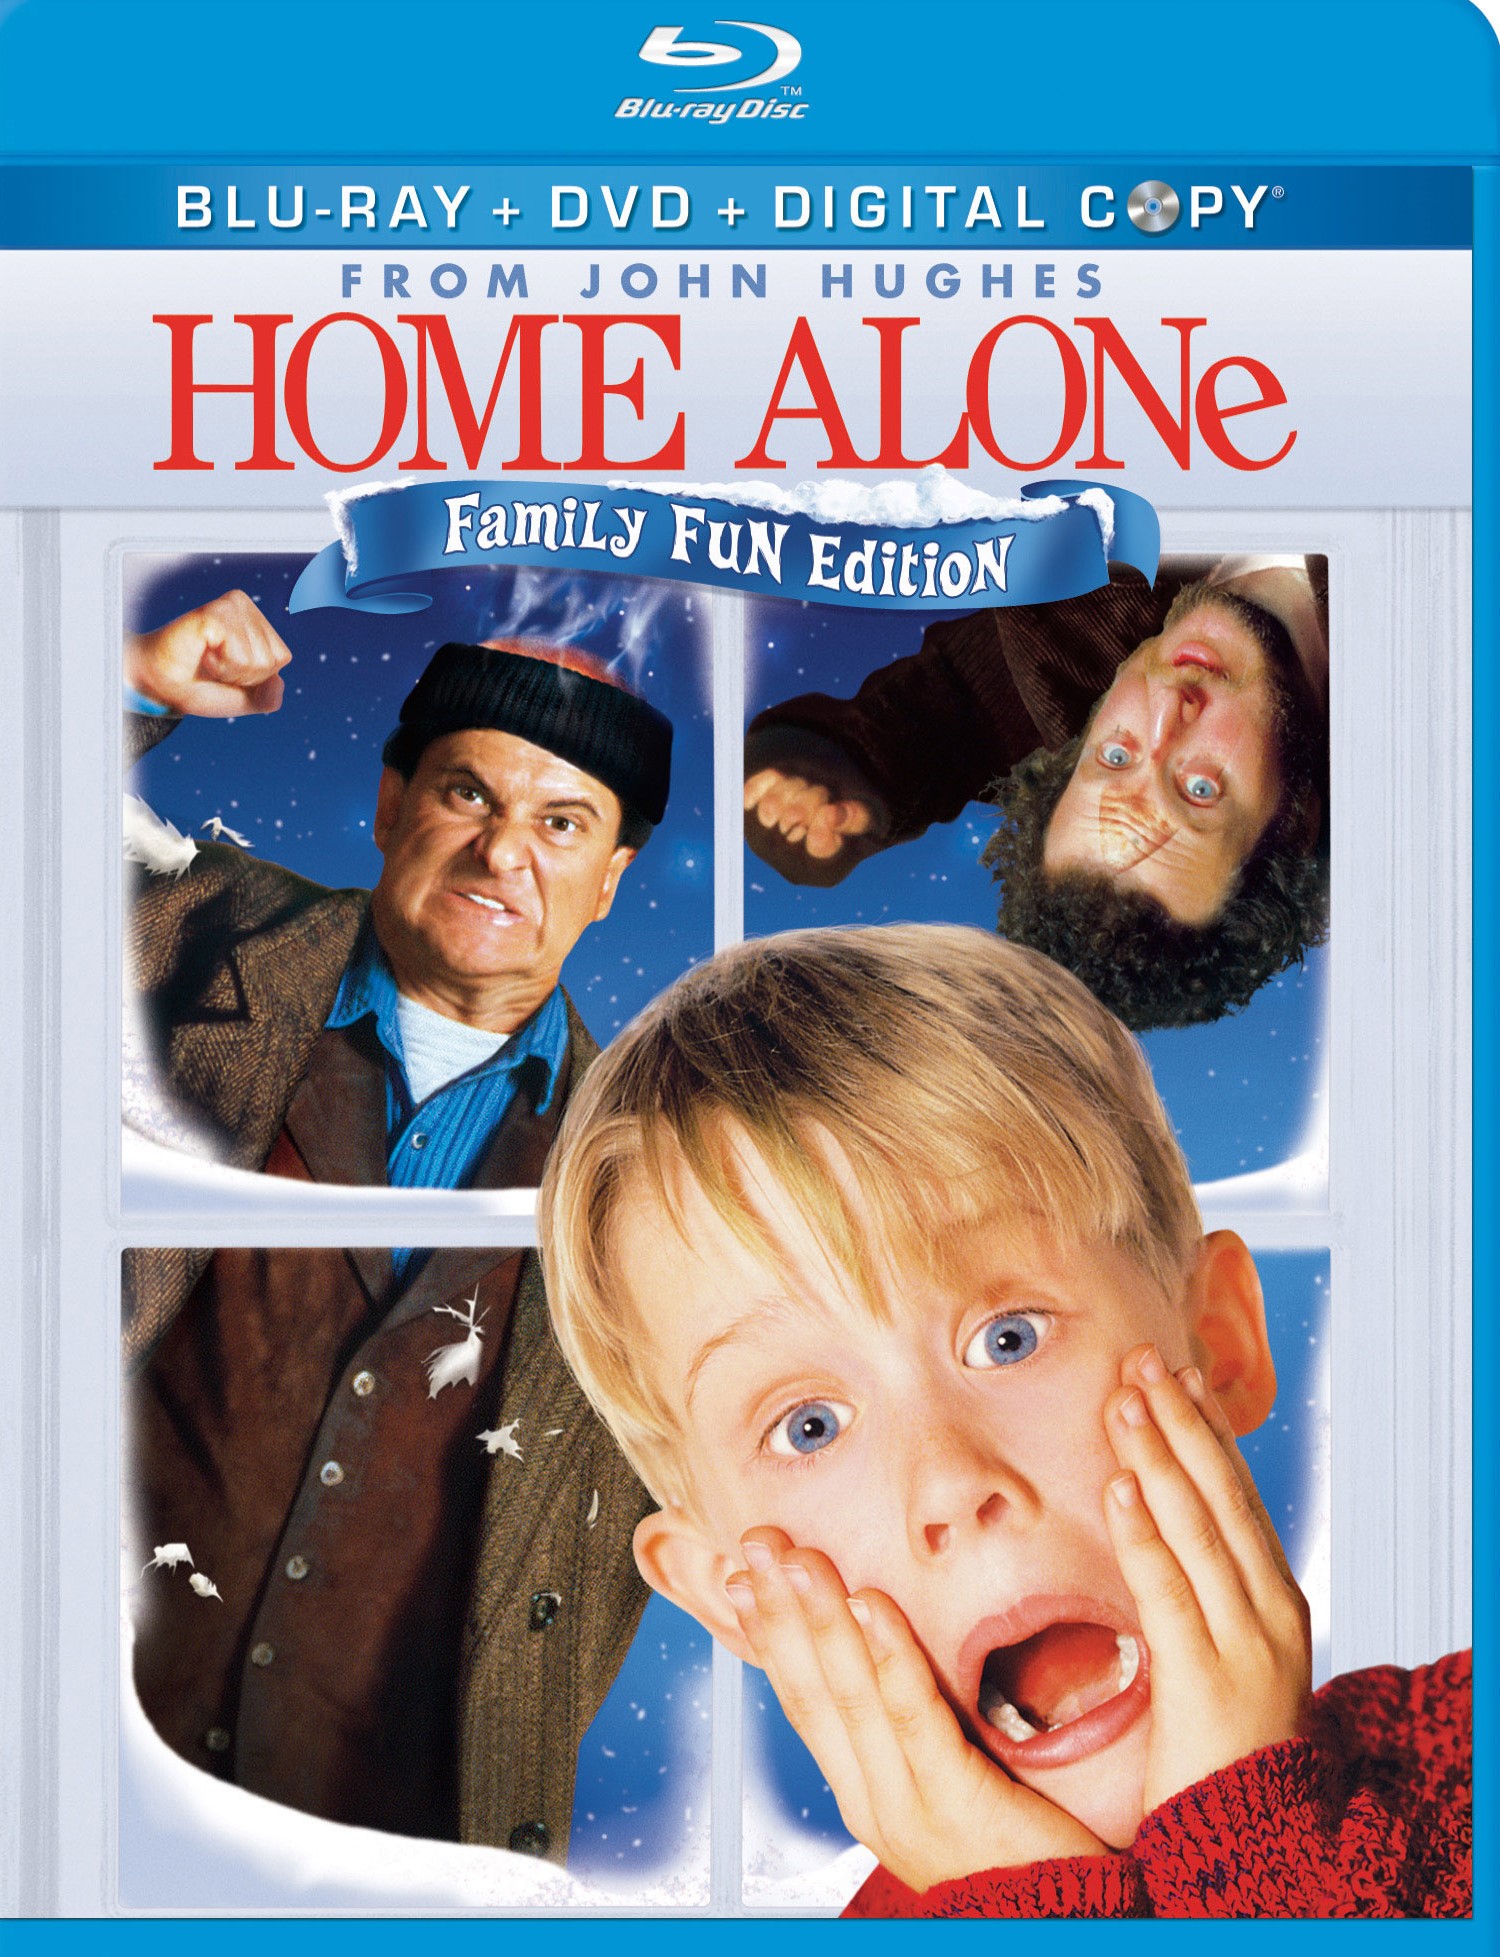 Home Alone: 2-Movie Collection [Blu-ray] [2 Discs] - Best Buy